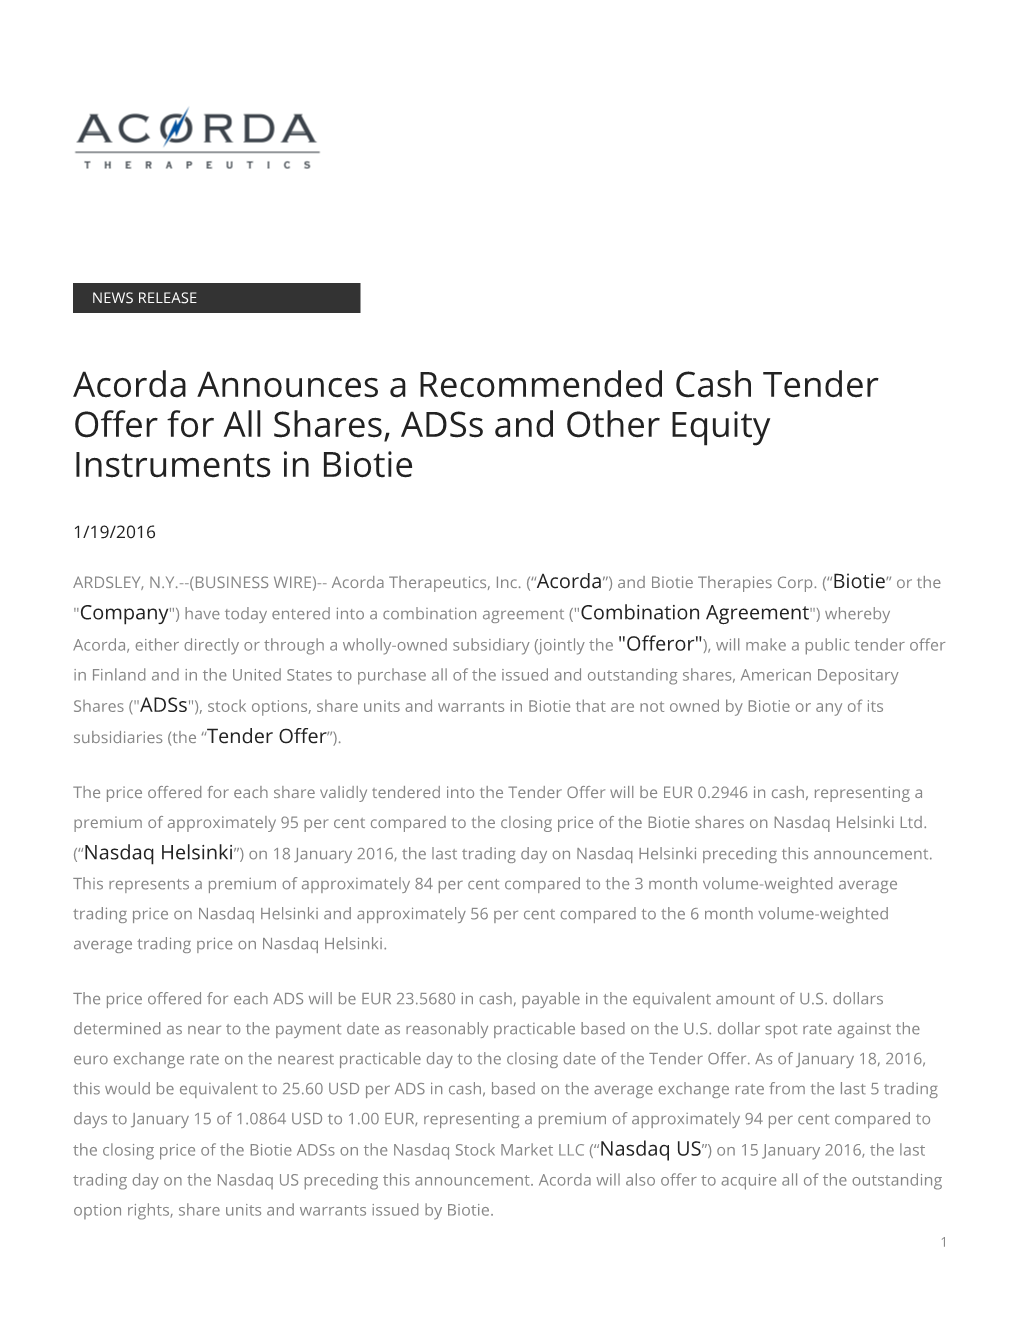 Acorda Announces a Recommended Cash Tender Offer for All Shares, Adss and Other Equity Instruments in Biotie